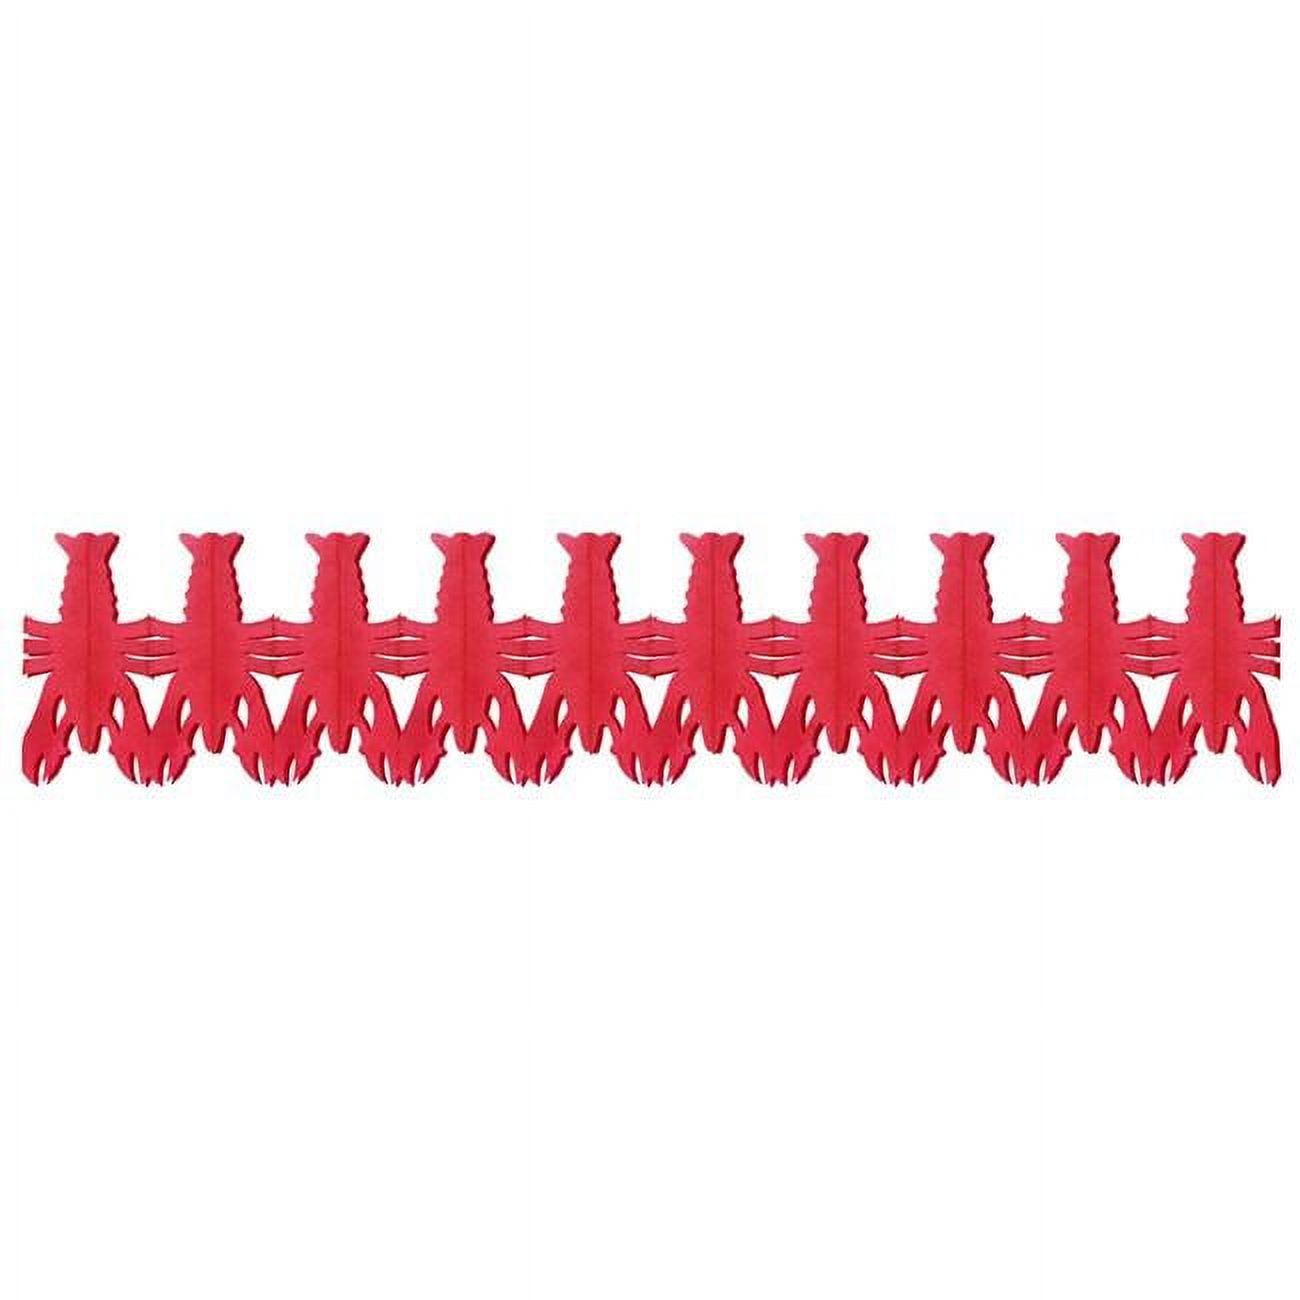 Picture of Beistle 53451 9 in. x 14 ft. Crawfish Garland - Pack of 12